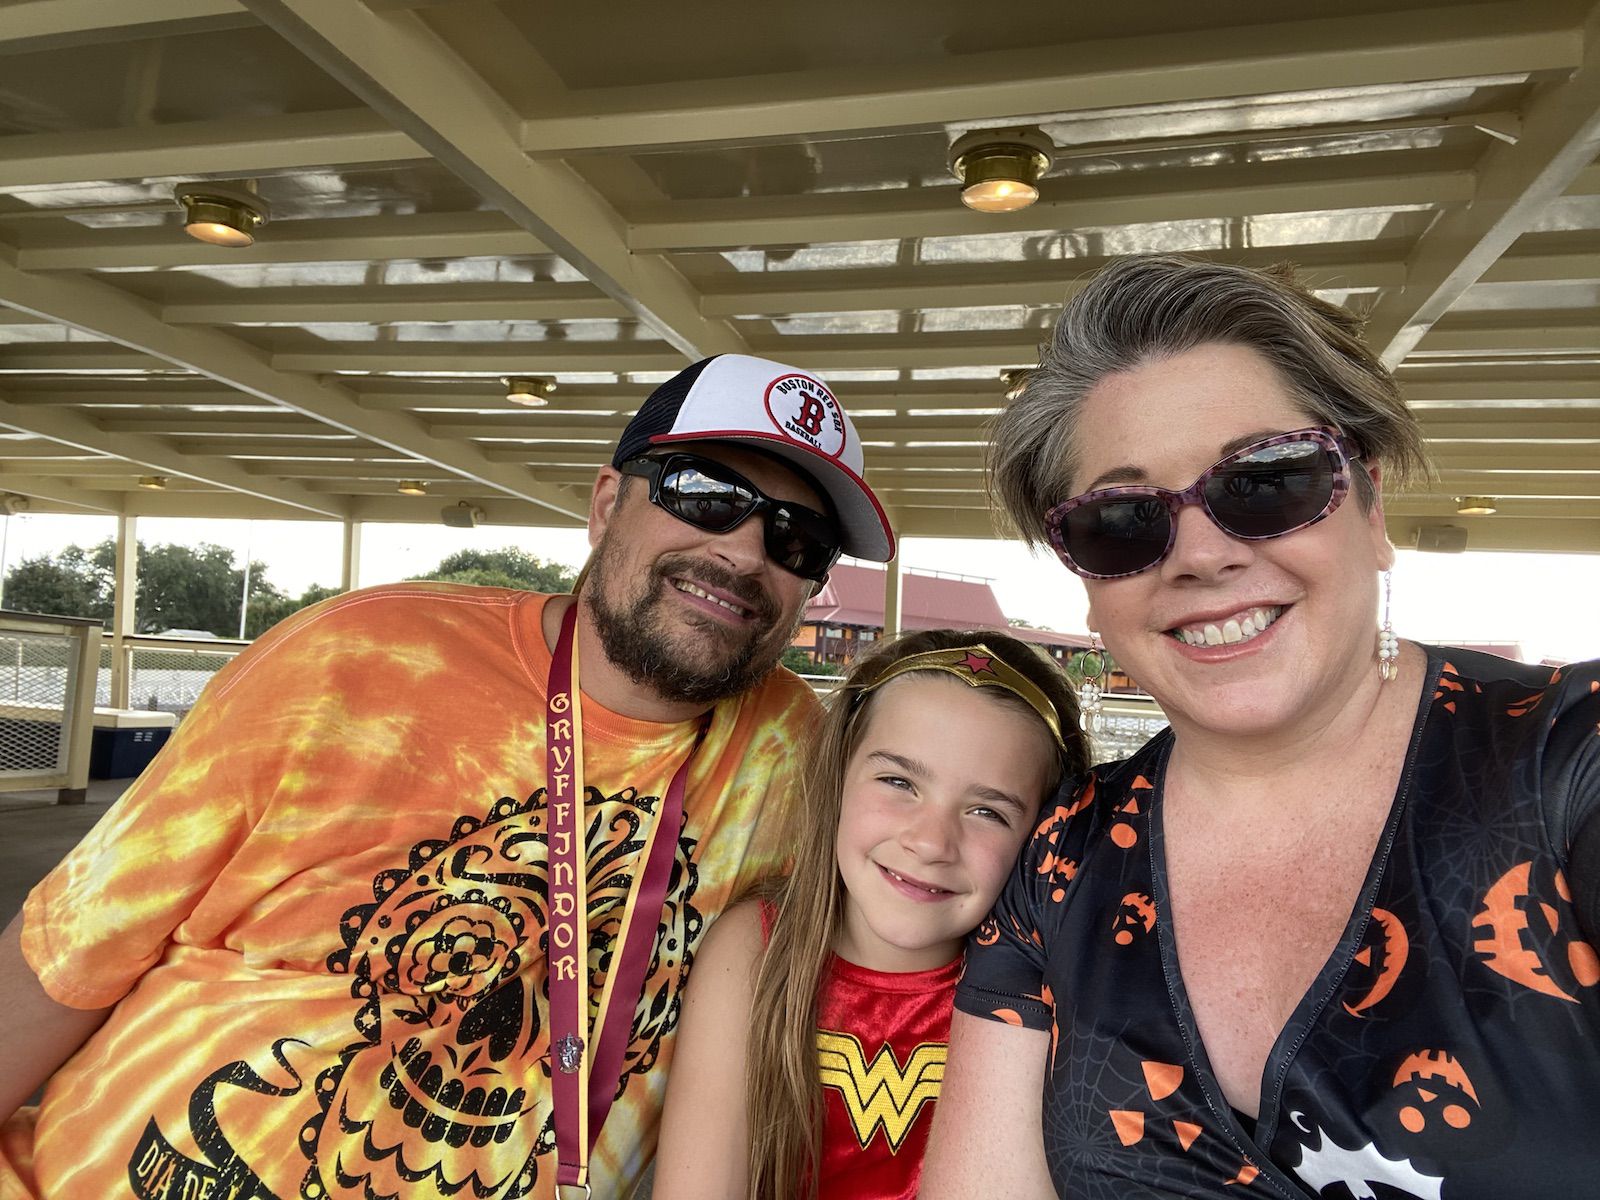 Disney World Returns Fully Working Iphone 11 To Family Weeks After Device Sank To Bottom Of Seven Seas Lagoon Macrumors